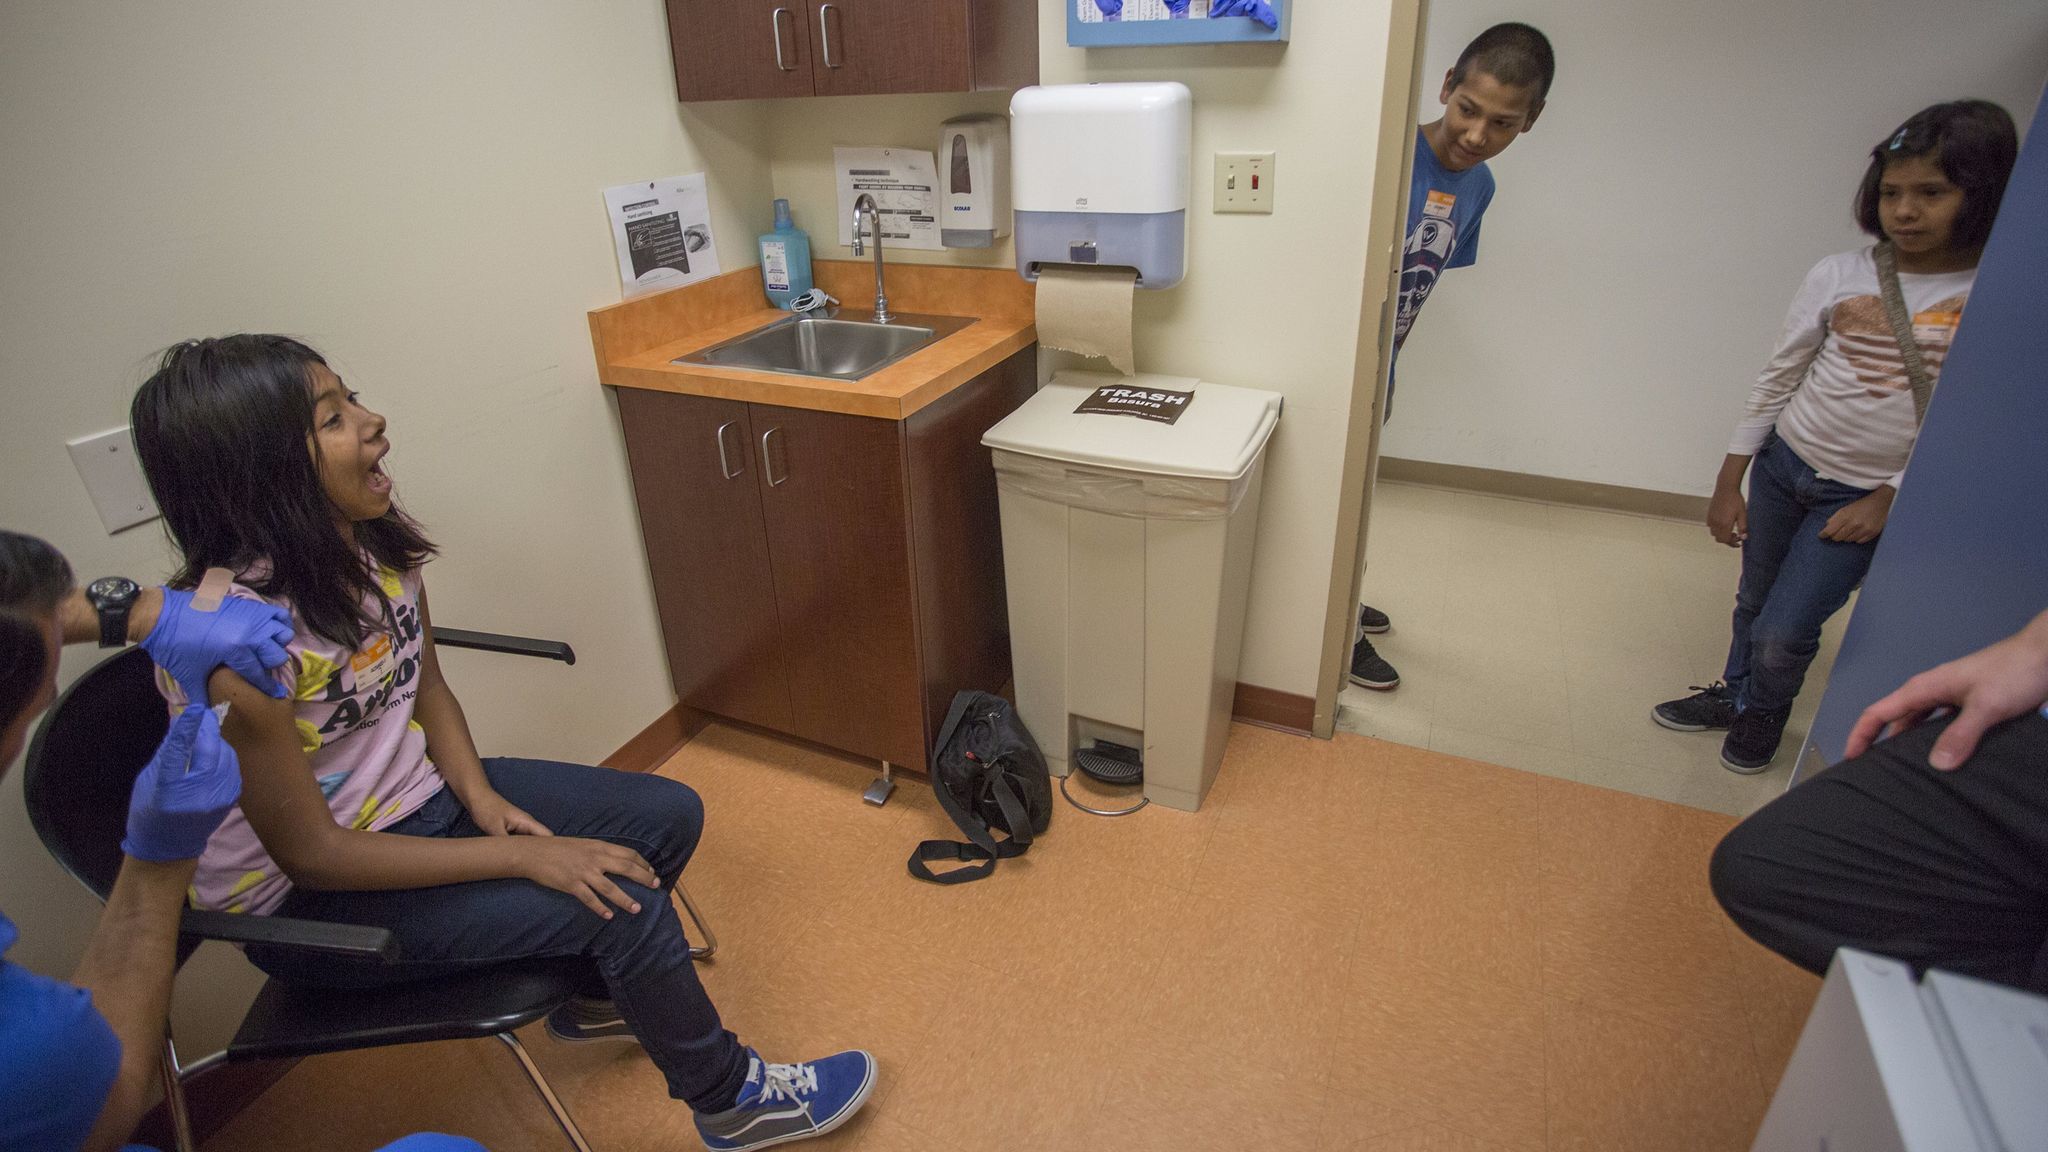 Gilbert Jr., 12, and Faith, 9, watch as their sister Carla Acosta, 11, is vaccinated by medical technician Ricardo Vasquez at Children's Hospital Los Angeles.